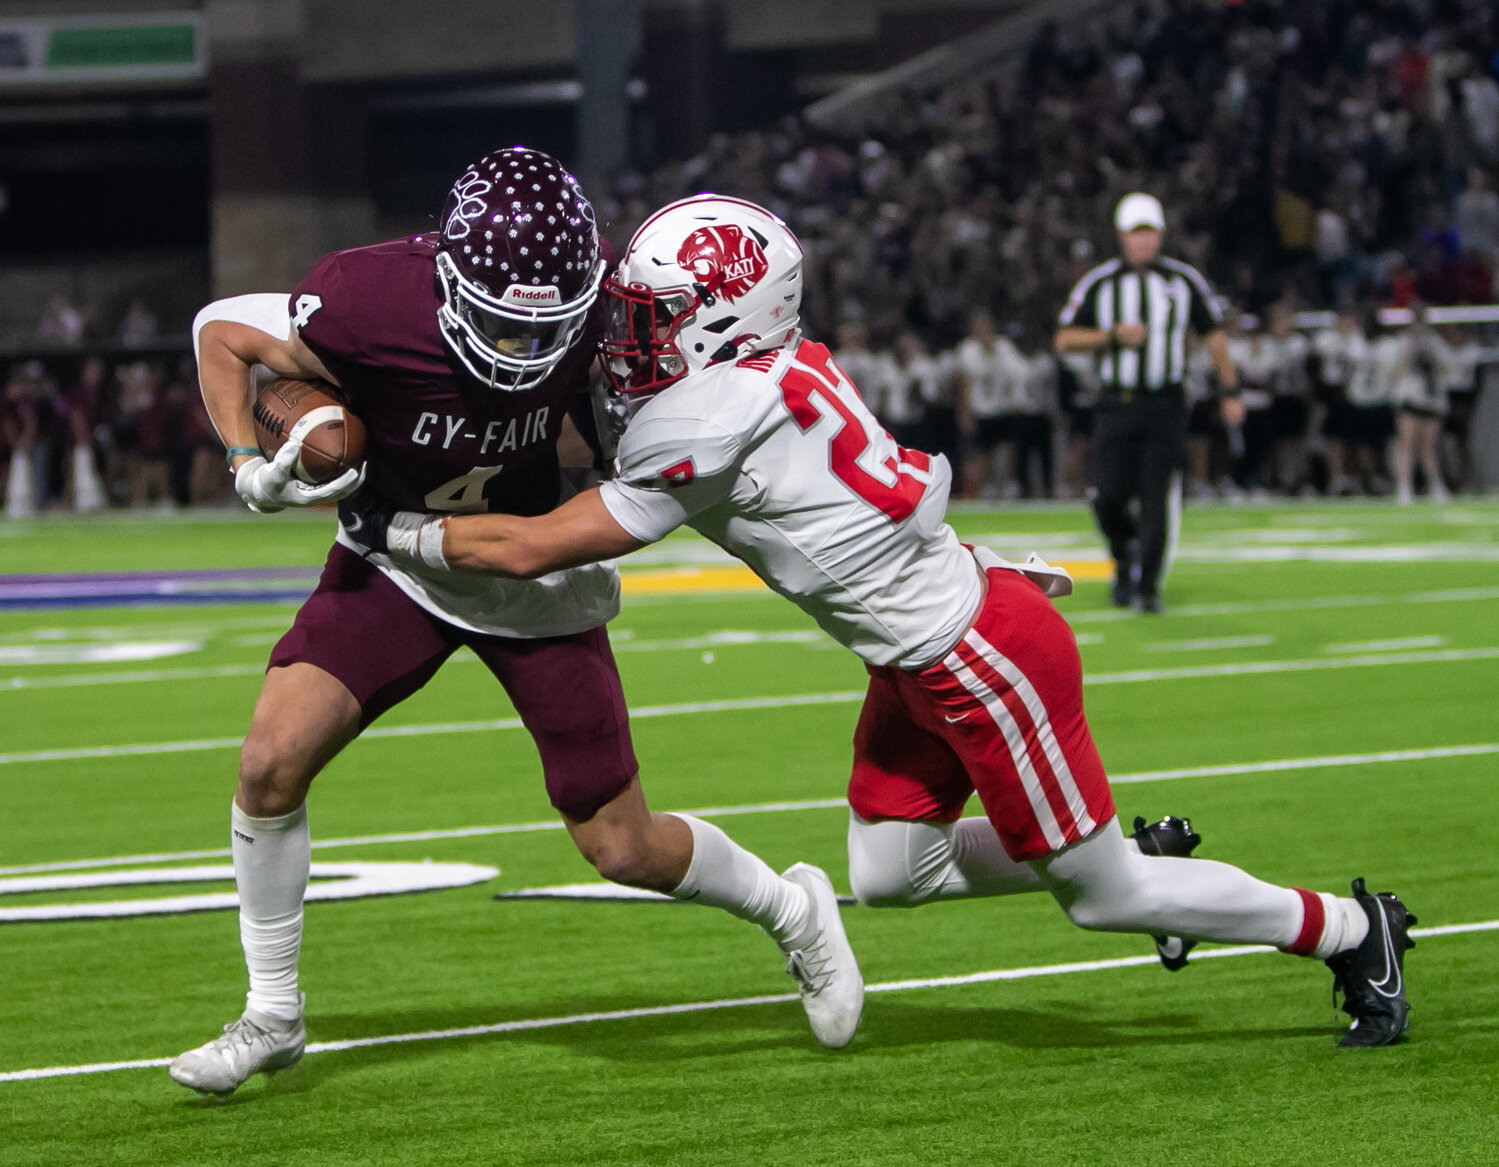 Jacob Hinton tackles a ballcarries during Friday's area round game between Katy and Cy-Fair at the Berry Center in Cypress.